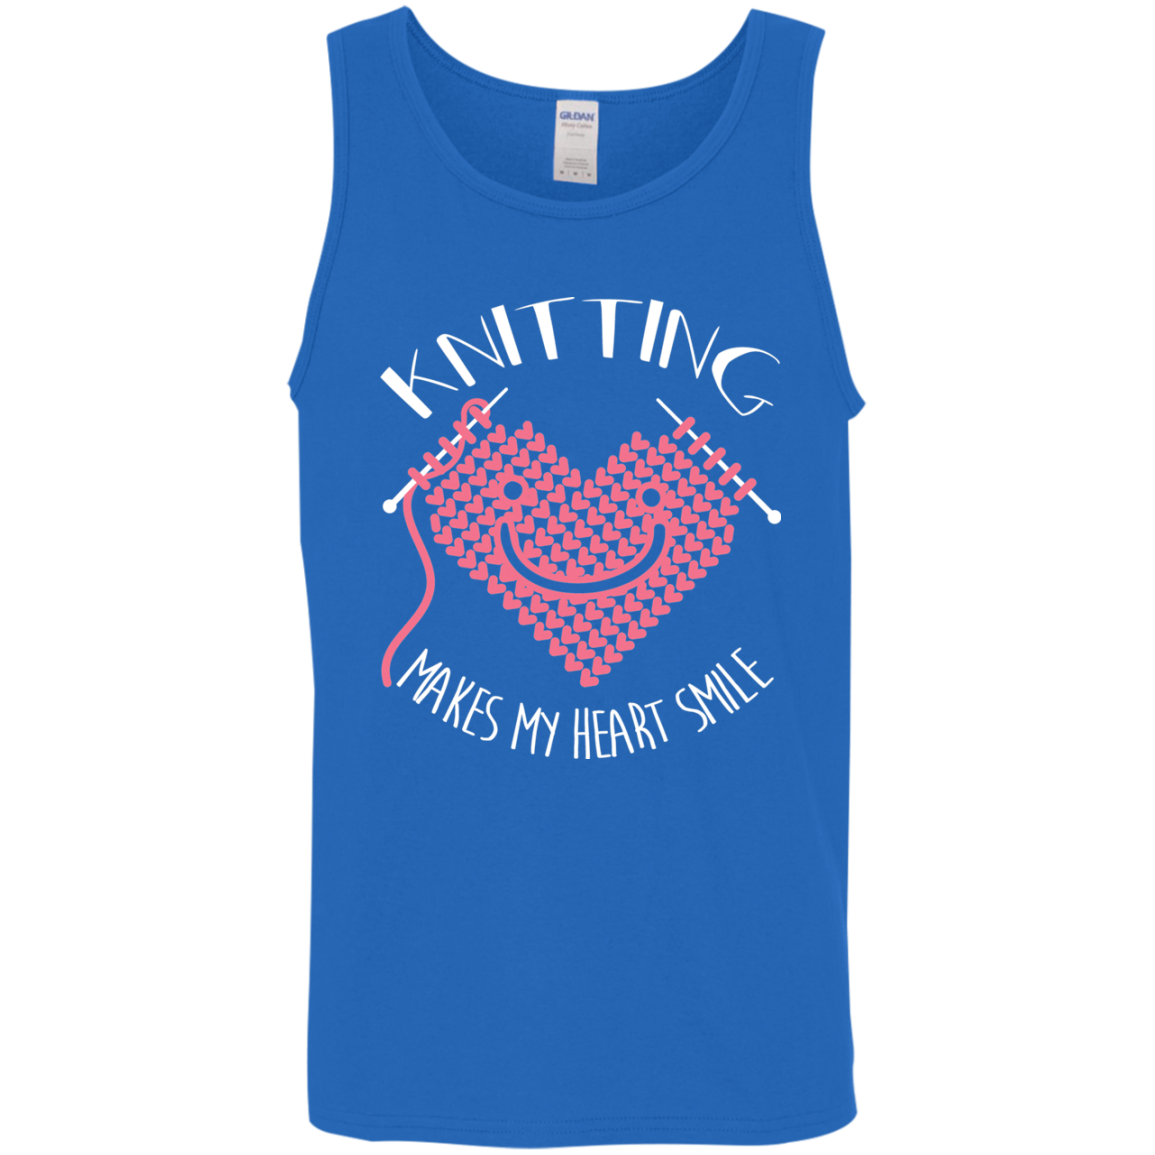 Knitting Makes My Heart Smile Cotton Tank Top